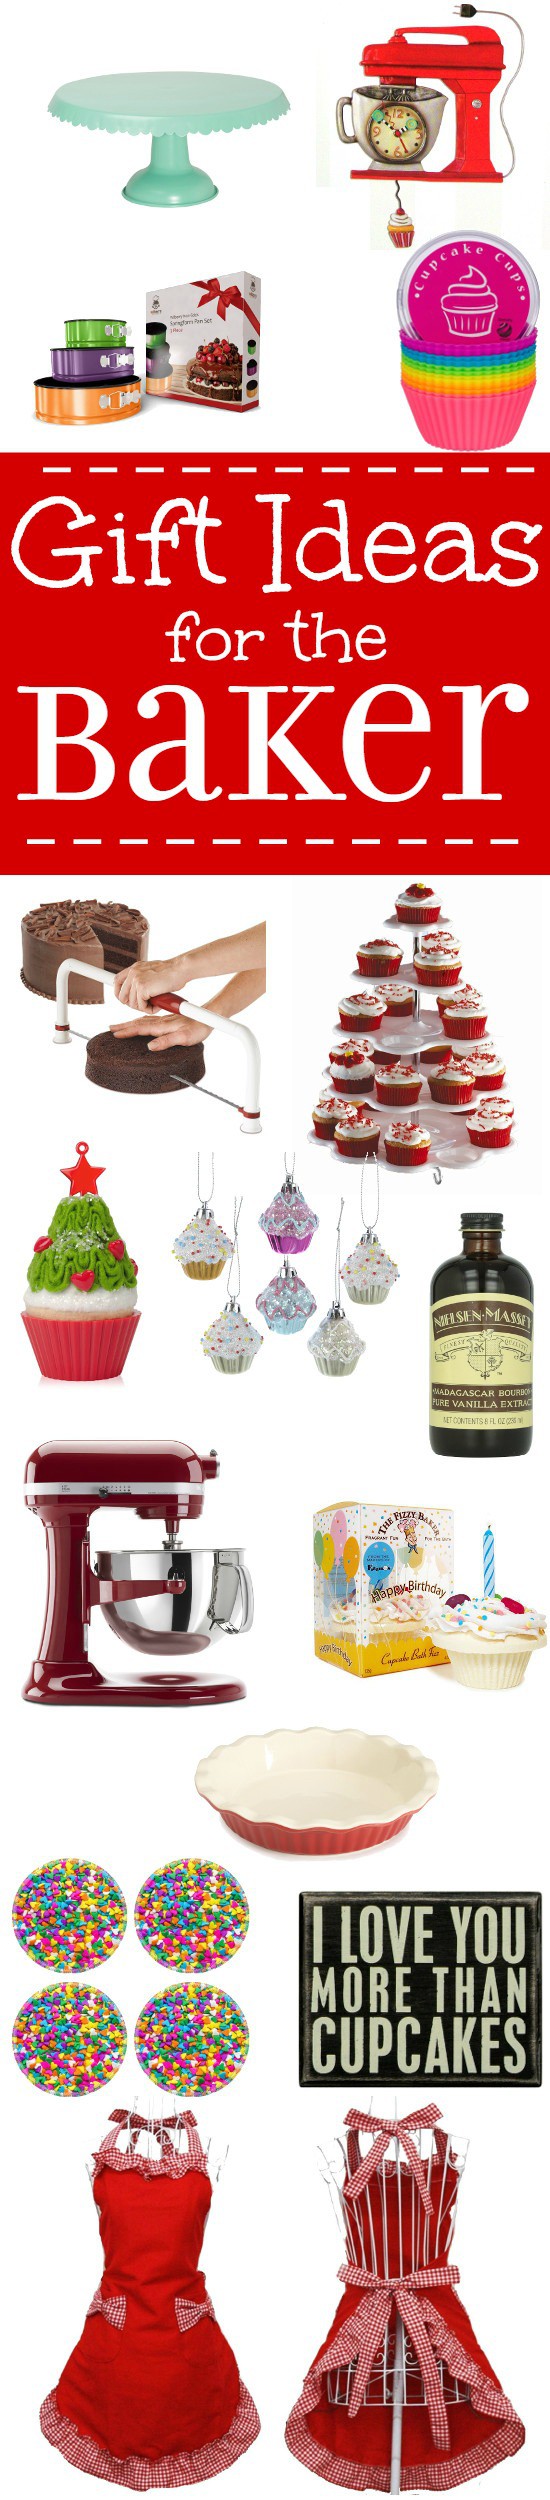 Gift Ideas for the Baker are perfect Christmas gift ideas for the sweets-lover in your life.  From pretty to practical, these Baker gift ideas will make them smile.